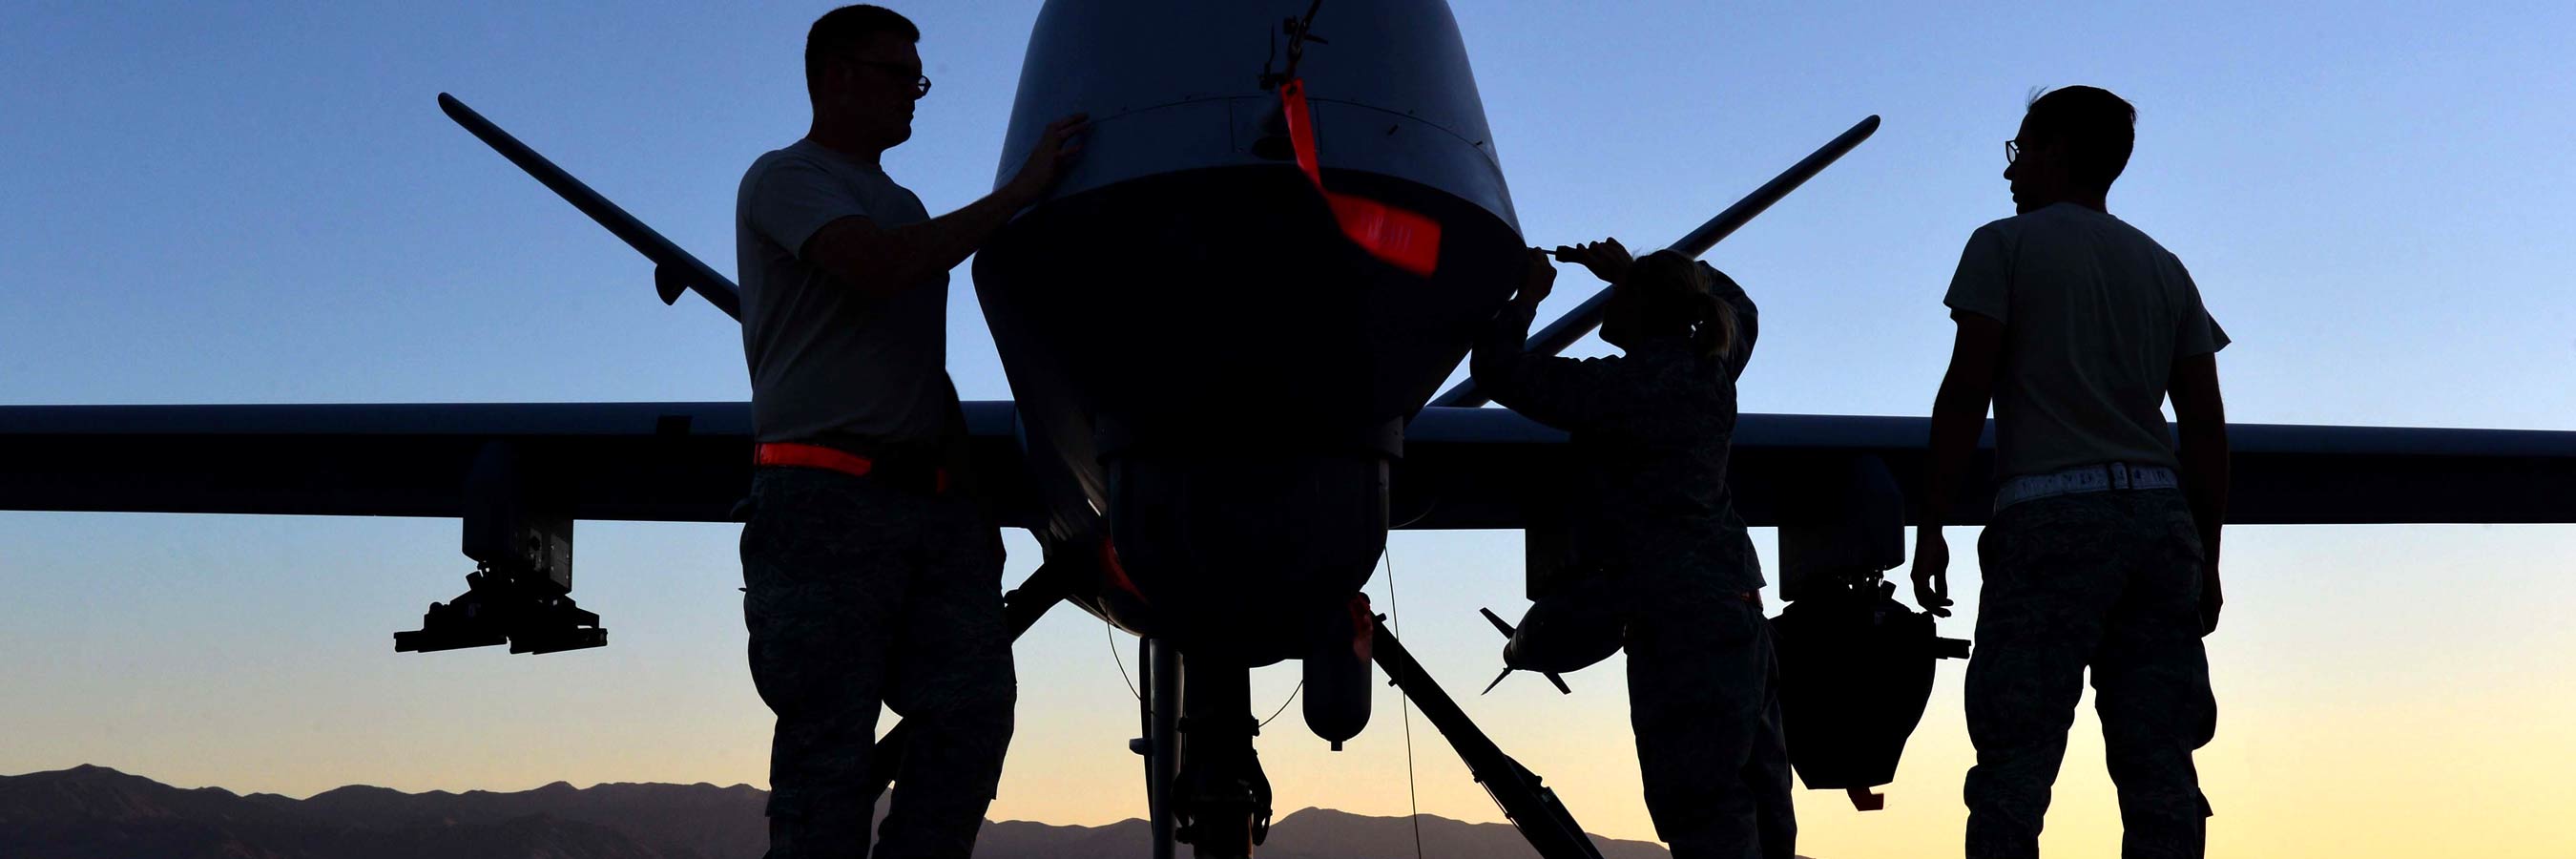 The silhouettes of two airmen with a fighter jet on a tarmac at sunrise